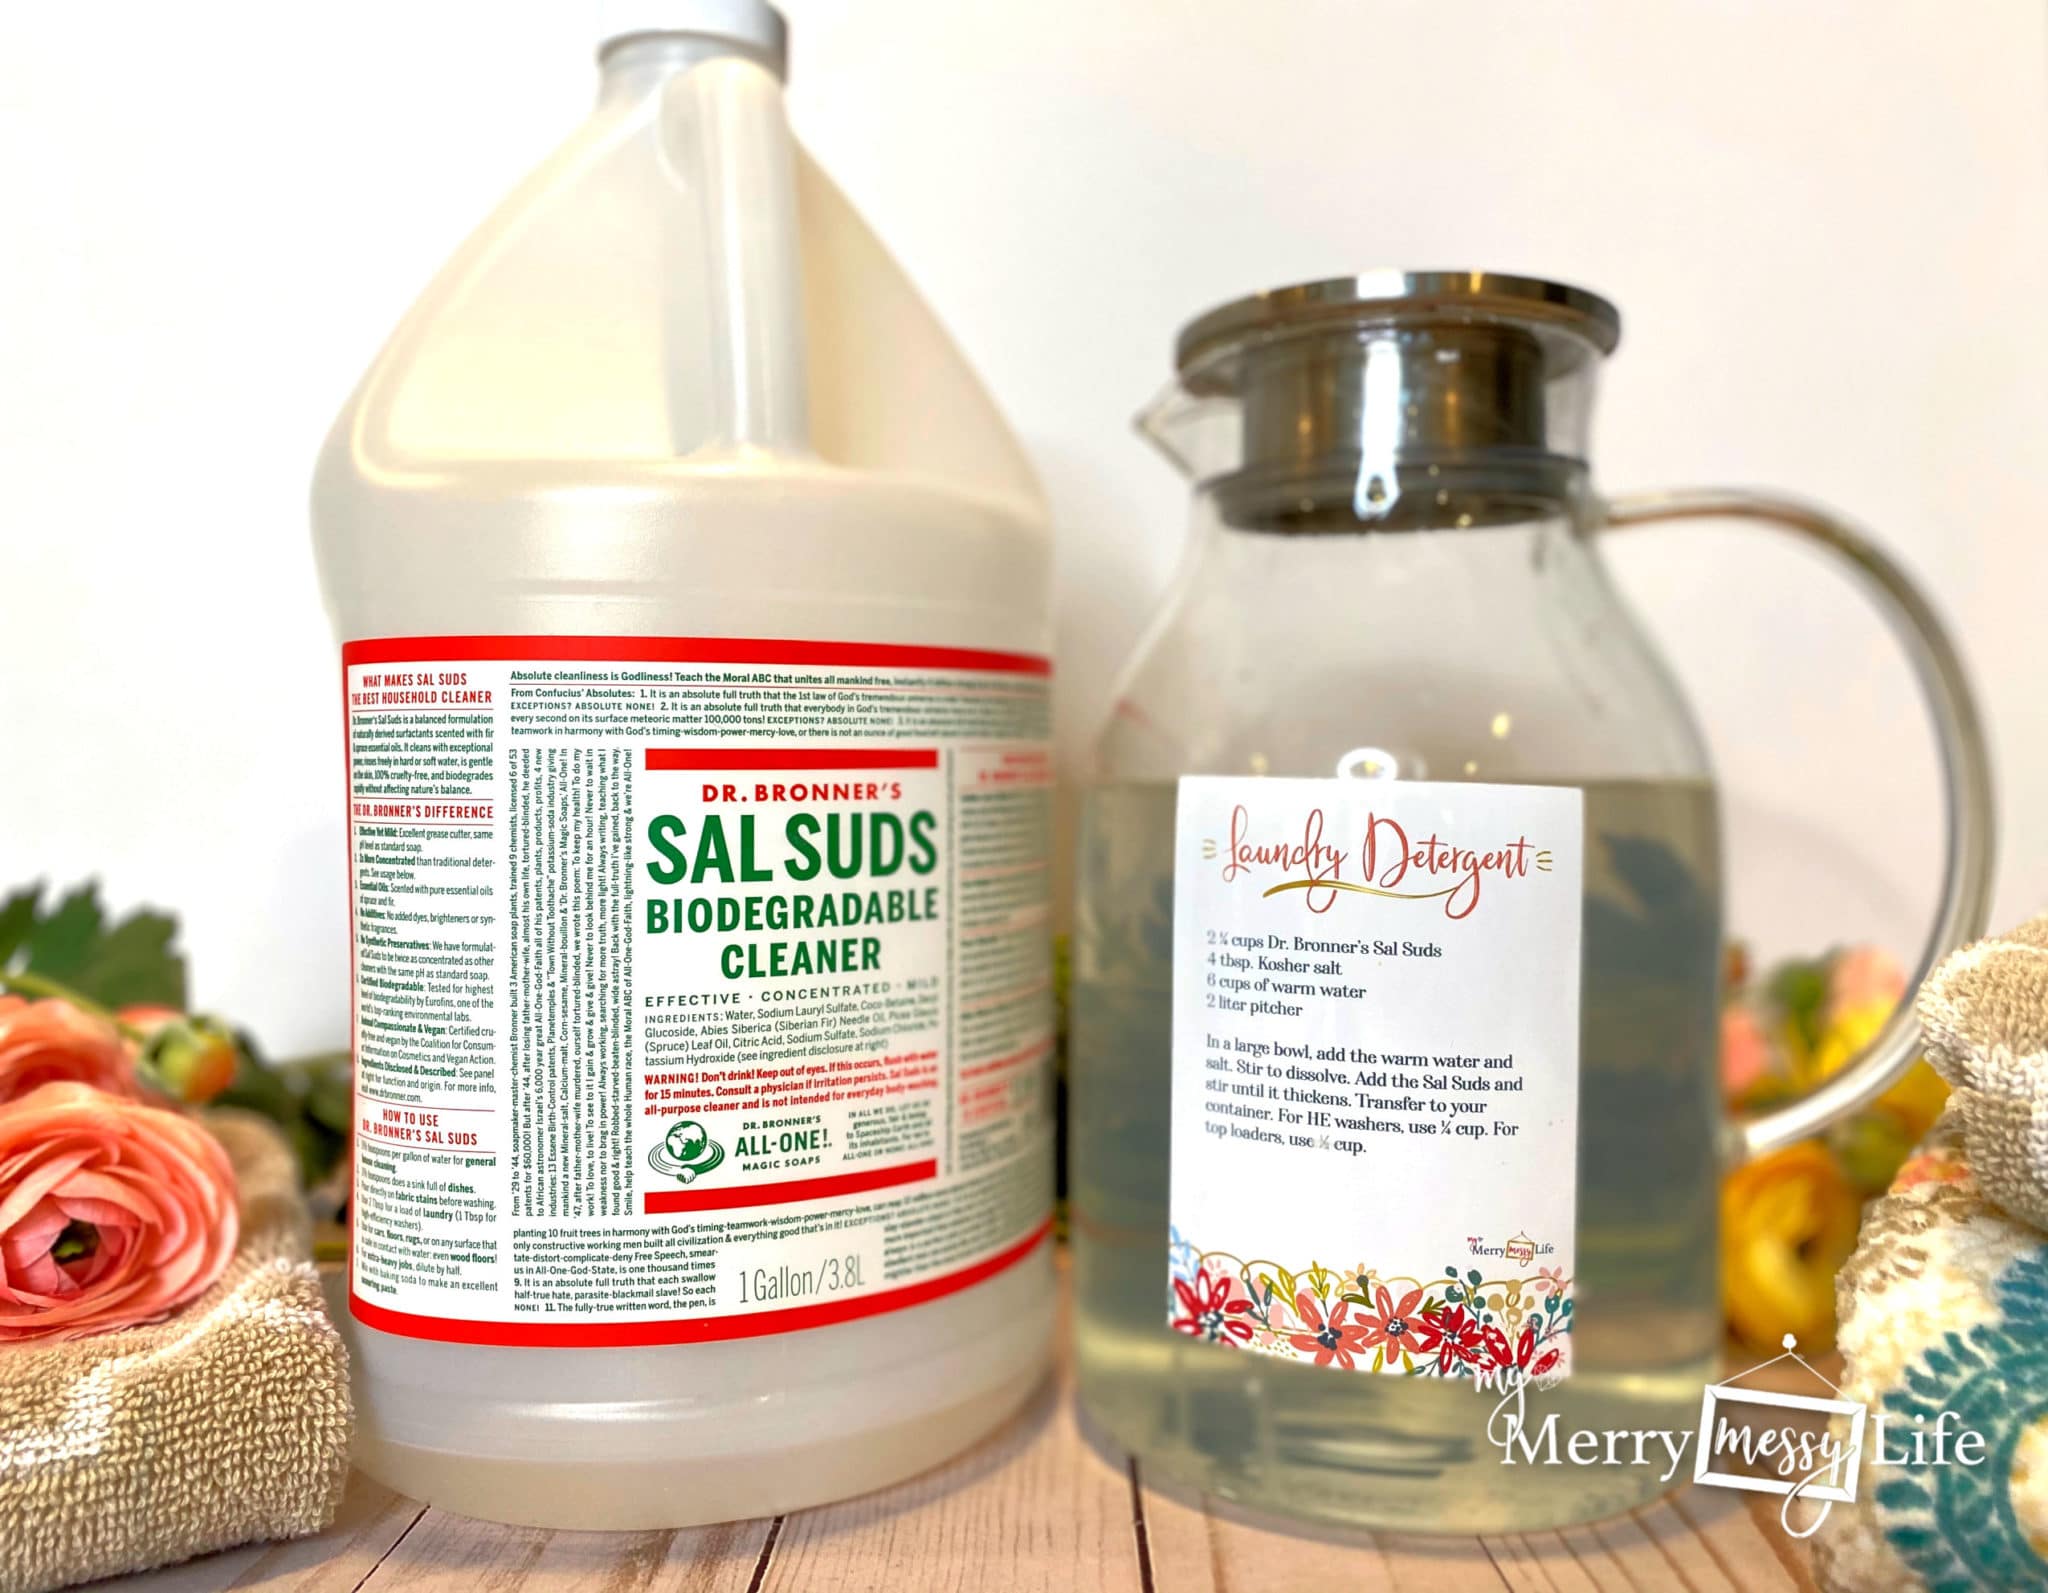 DIY Laundry Detergent Recipe with Dr. Bronner's Sal Suds - Totally Safe, Nontoxic and Easy